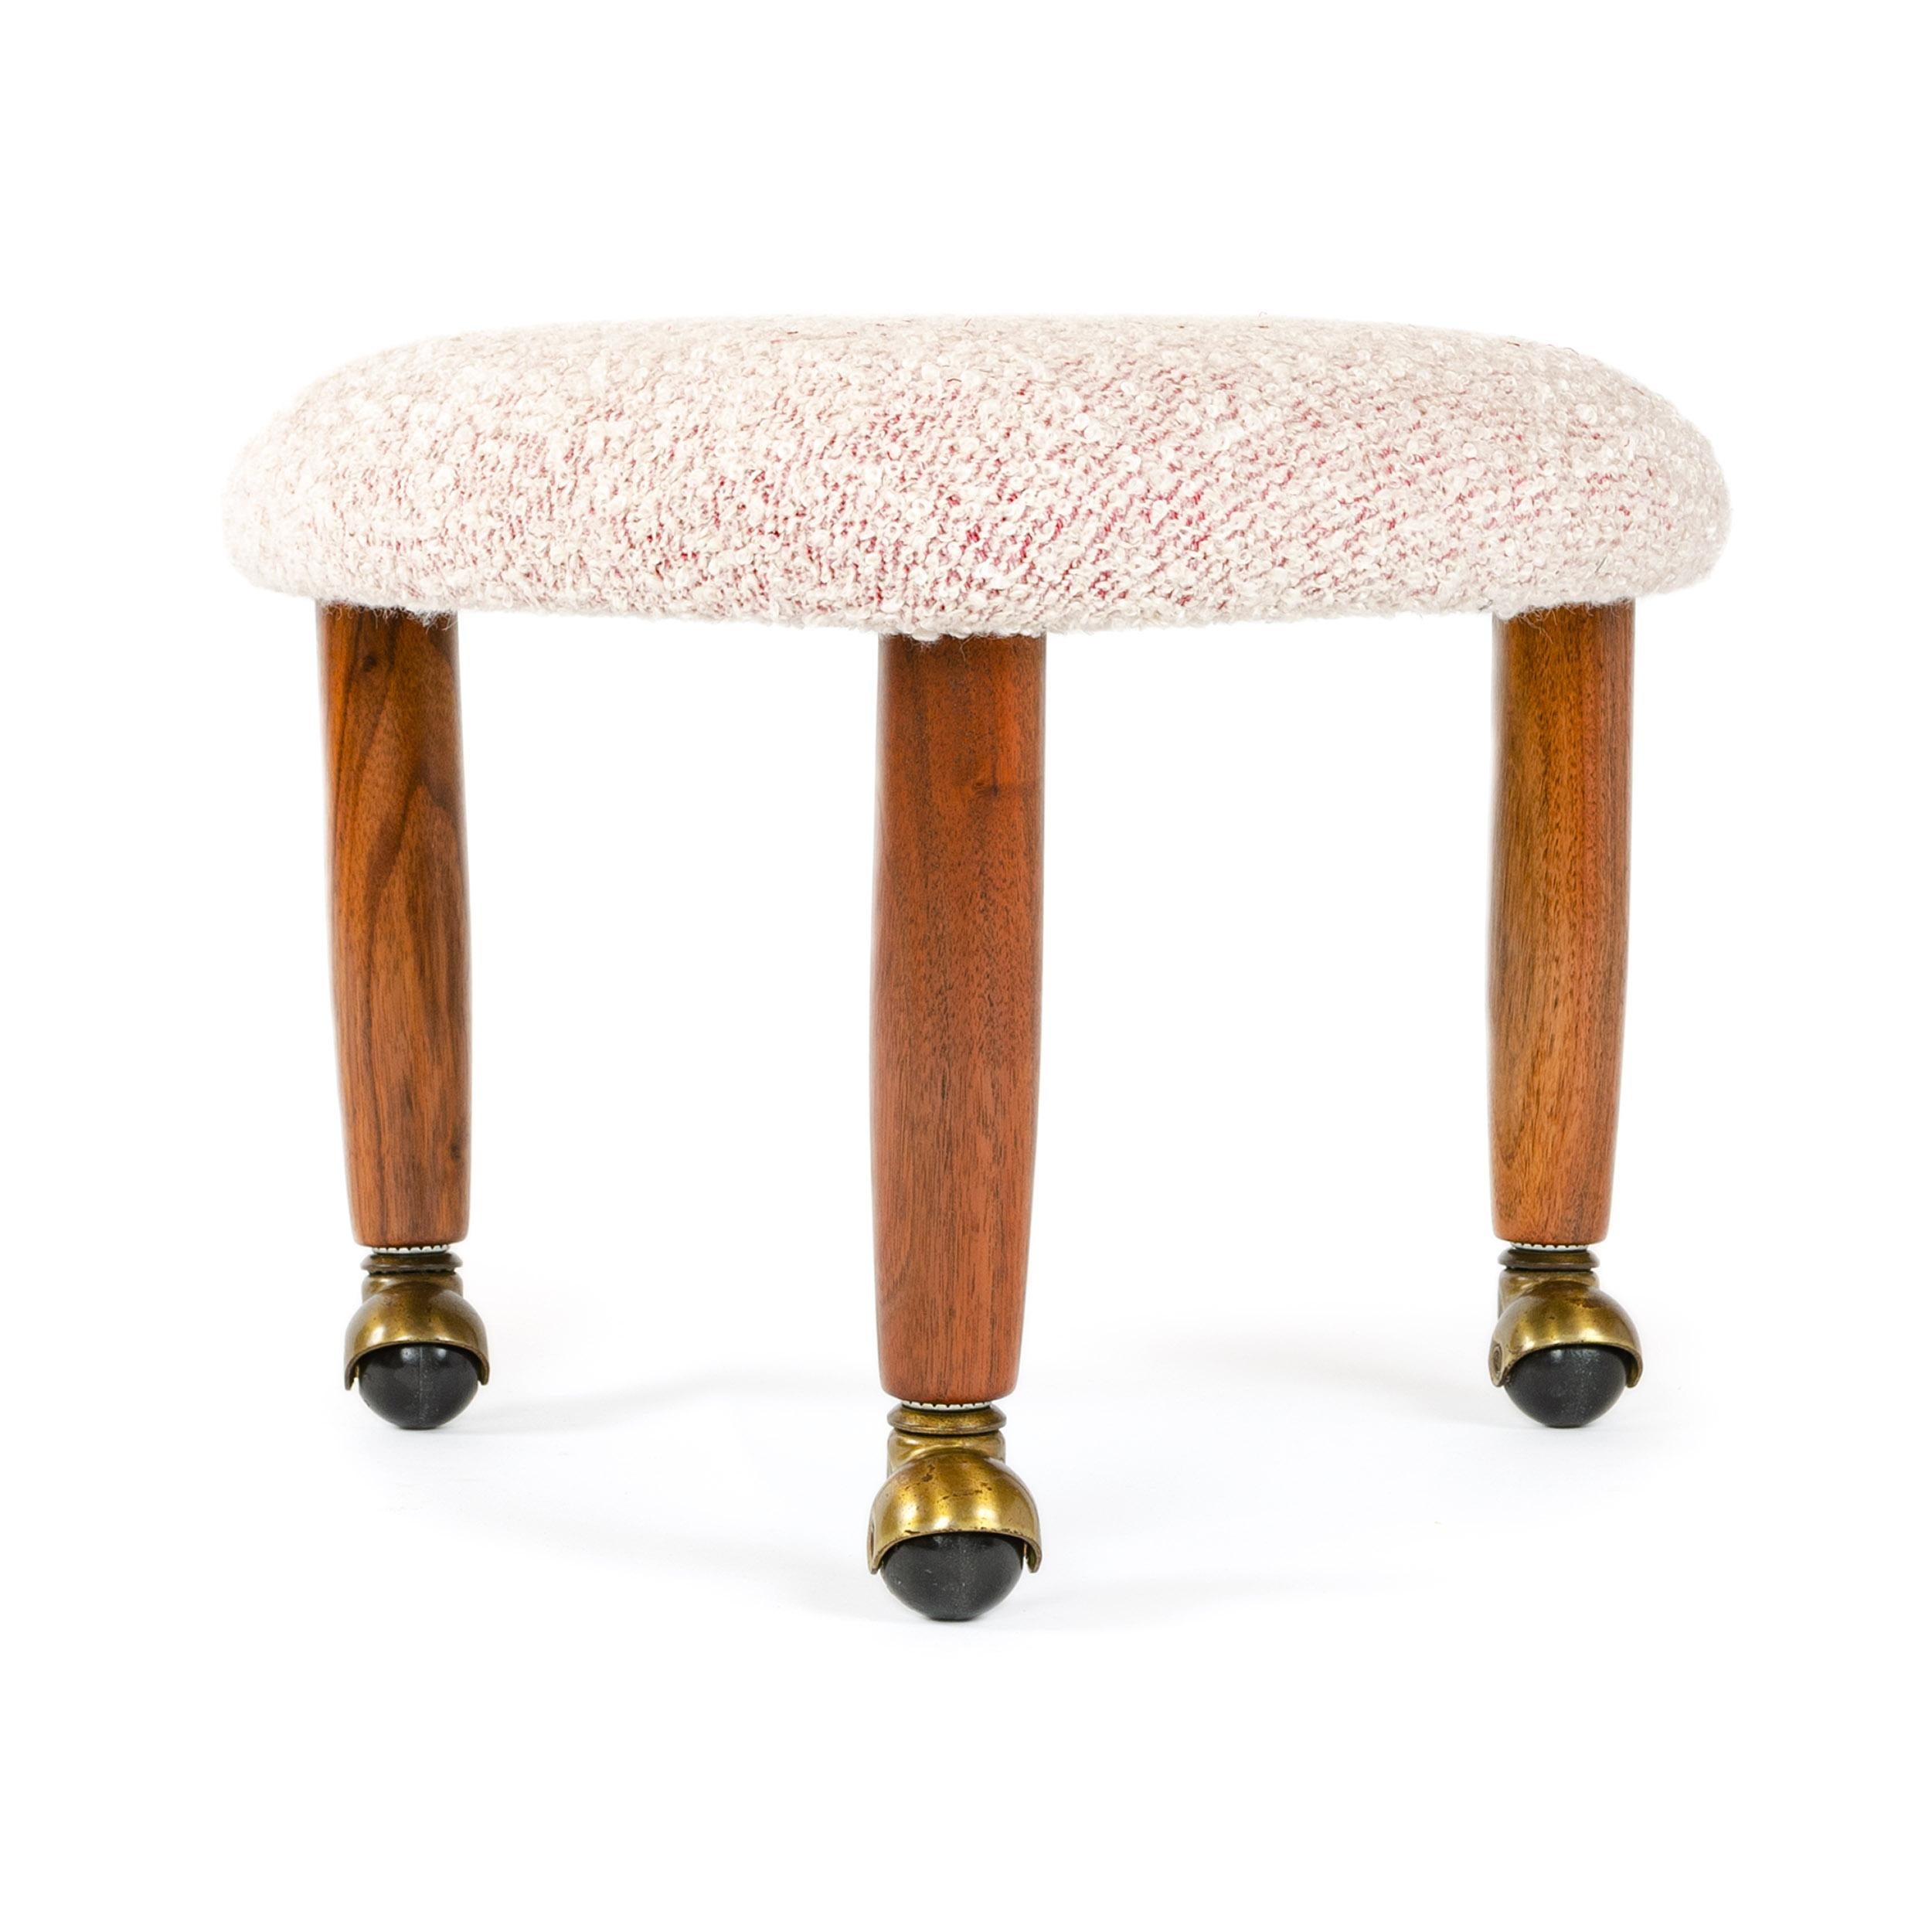 A newly upholstered three (3) legged triangular stool in raspberry boucle on swollen dowel legs with caster feet.